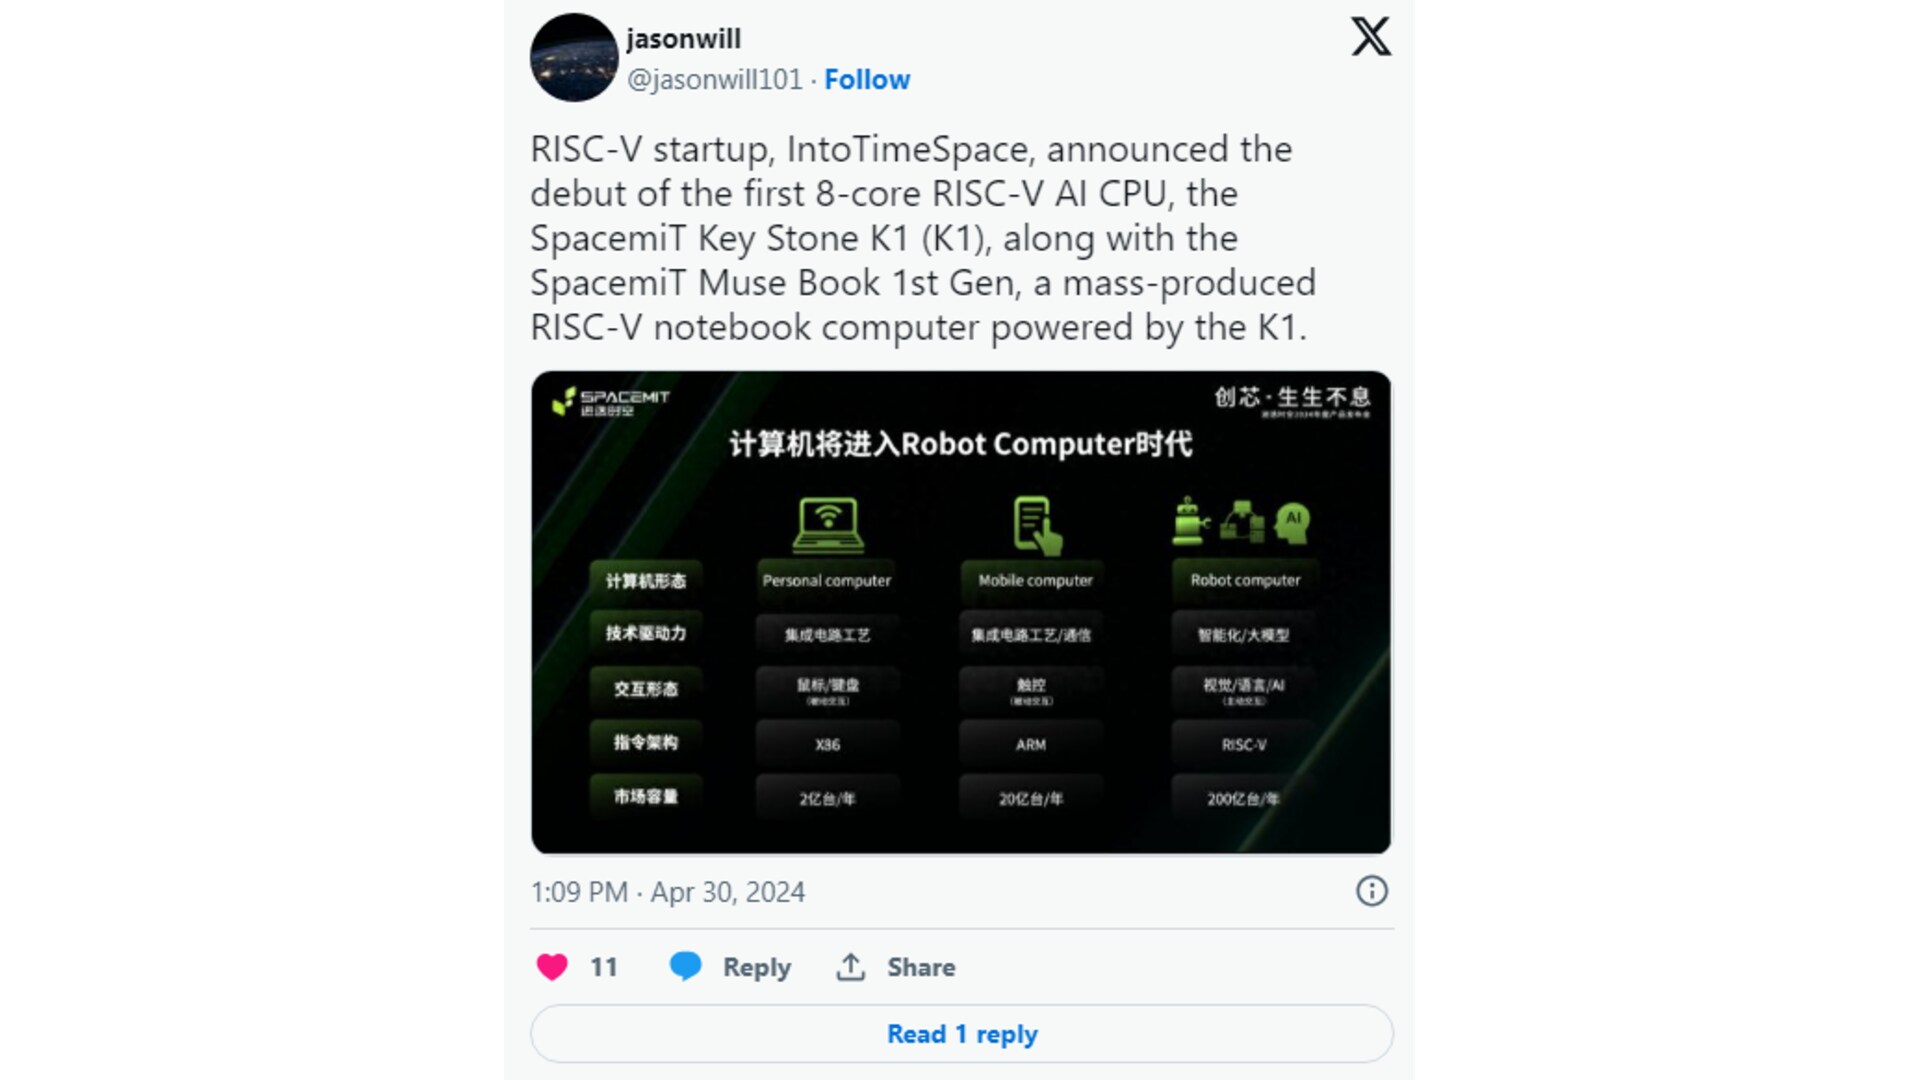 First RISC-V Based AI CPU specs